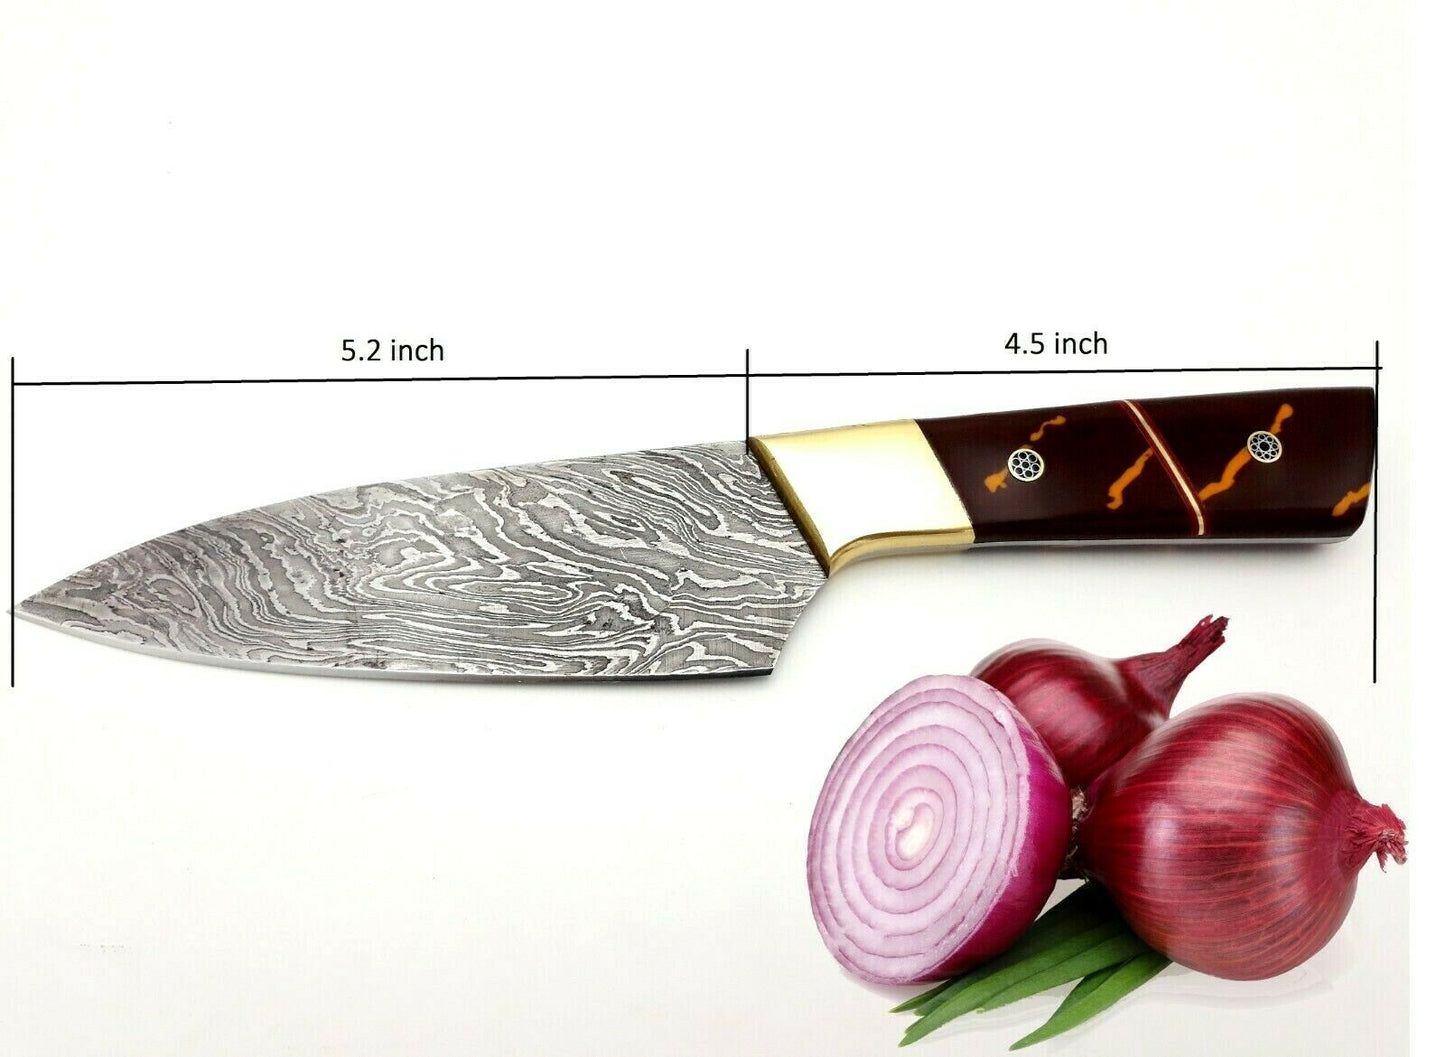 Masterfully Crafted 10-Inch Damascus Chef's Knife: Unrivaled Sharpness, Full Tang Design, Complete with Sheath"